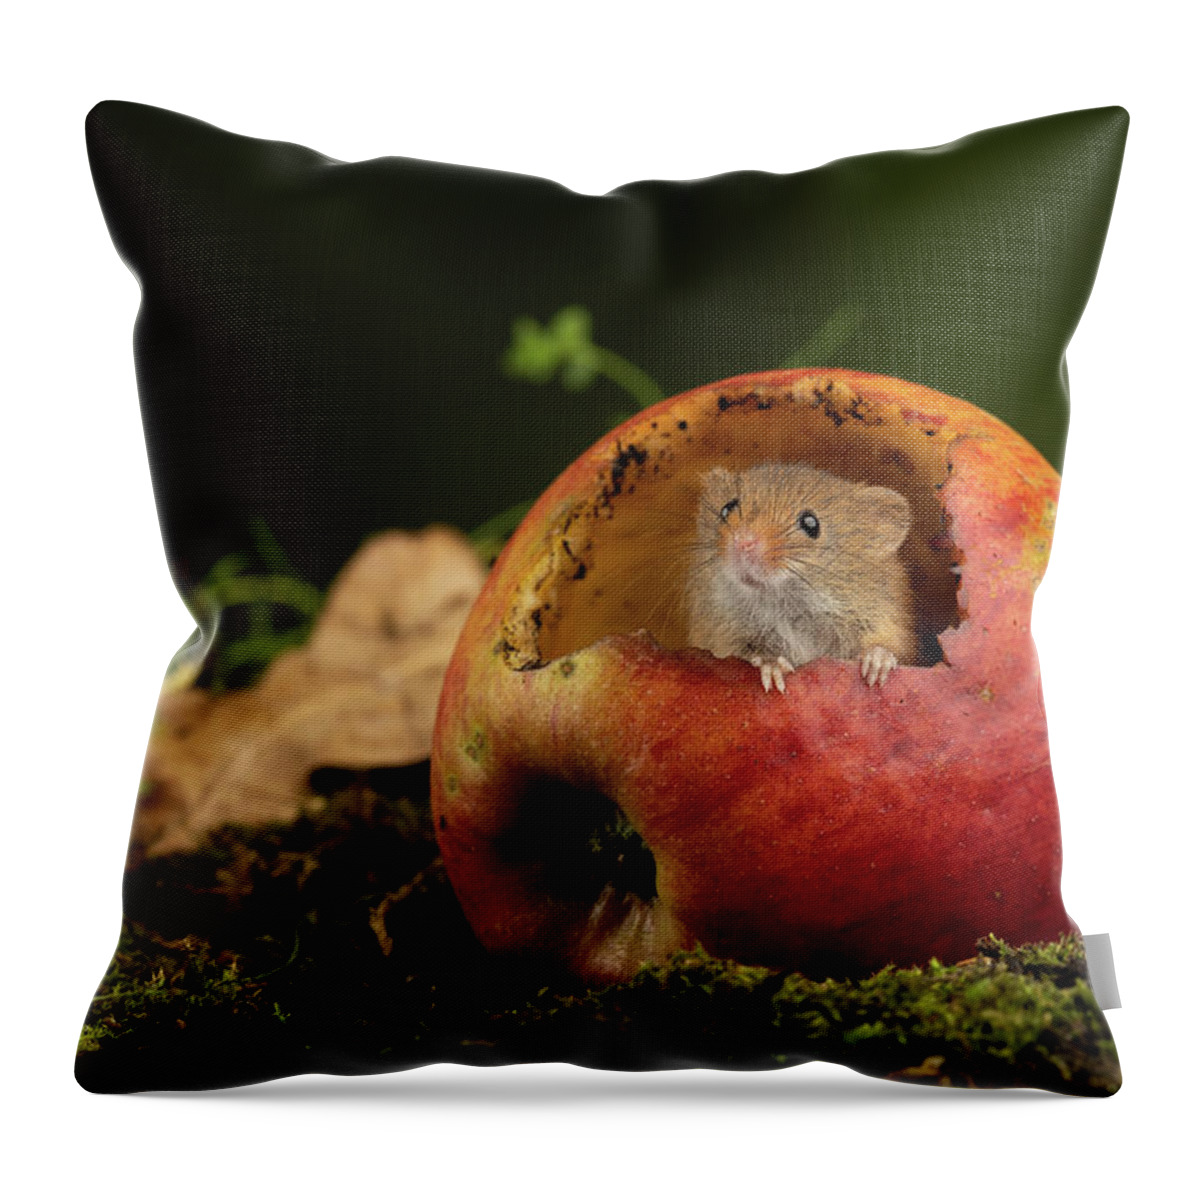 Harvest Throw Pillow featuring the photograph Hm-2427 by Miles Herbert